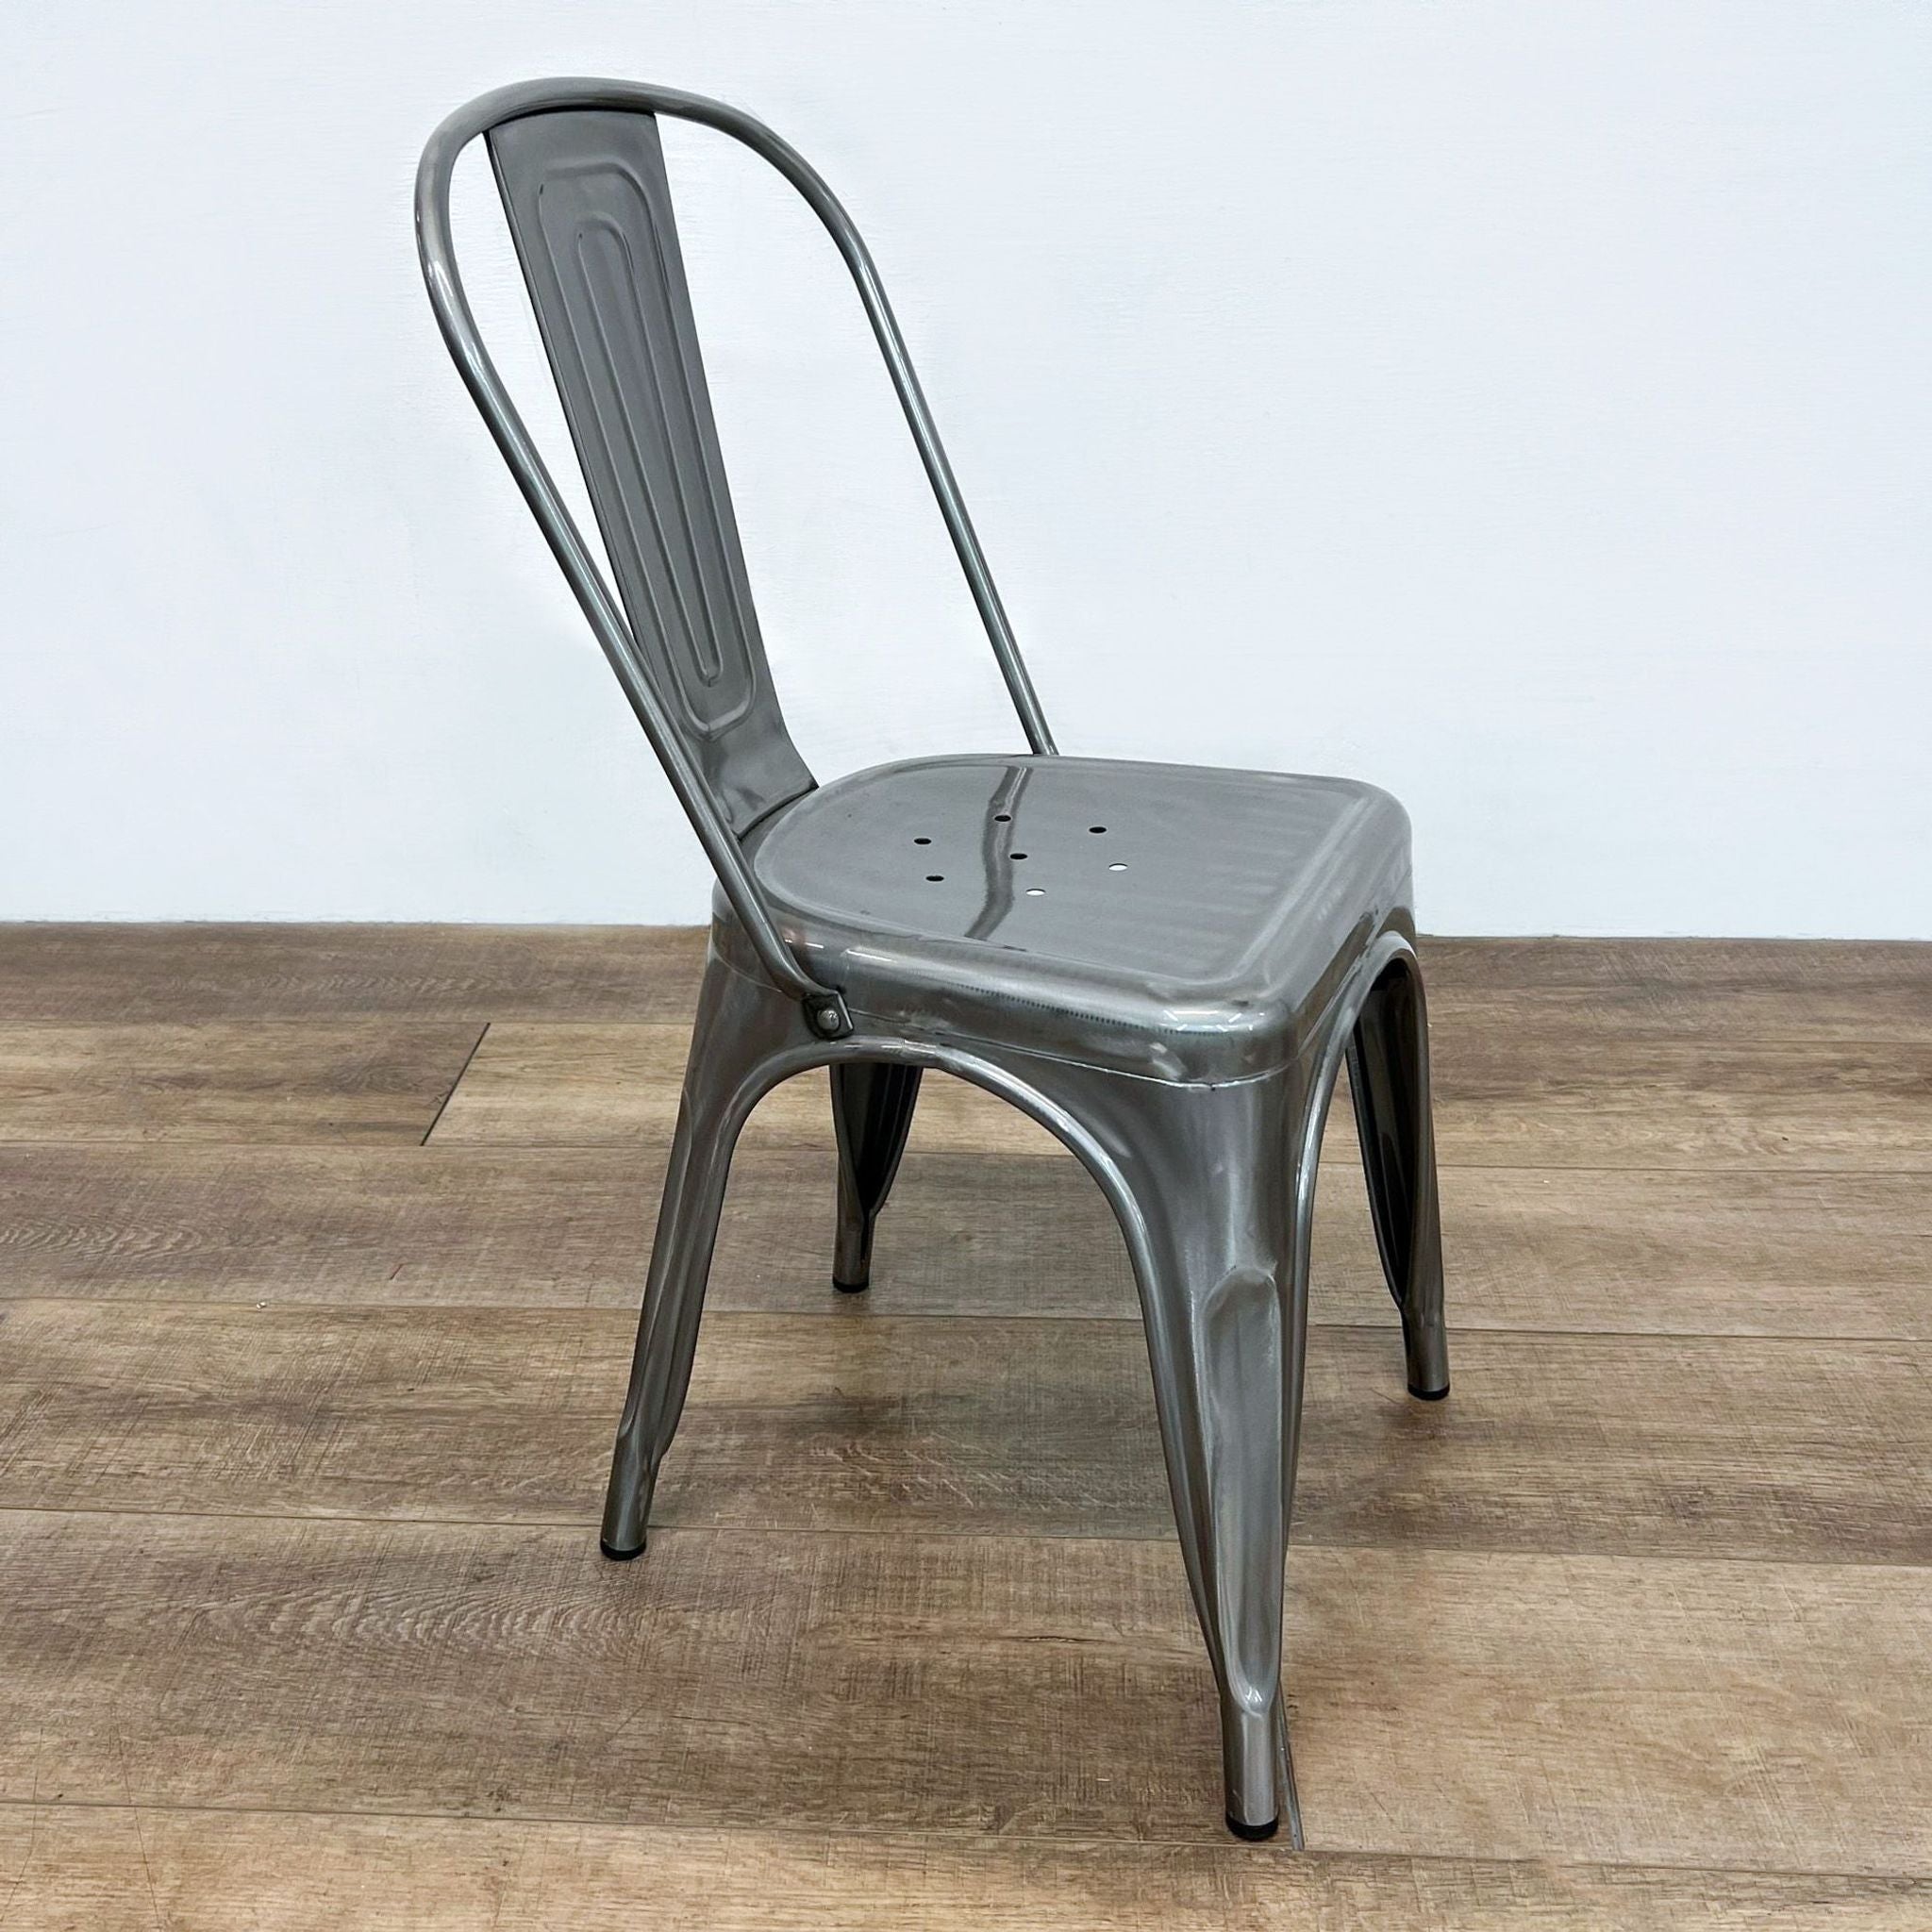 Sturdy Reperch dining chair featuring a metal build, curved backrest and compact, stackable shape for versatile seating.